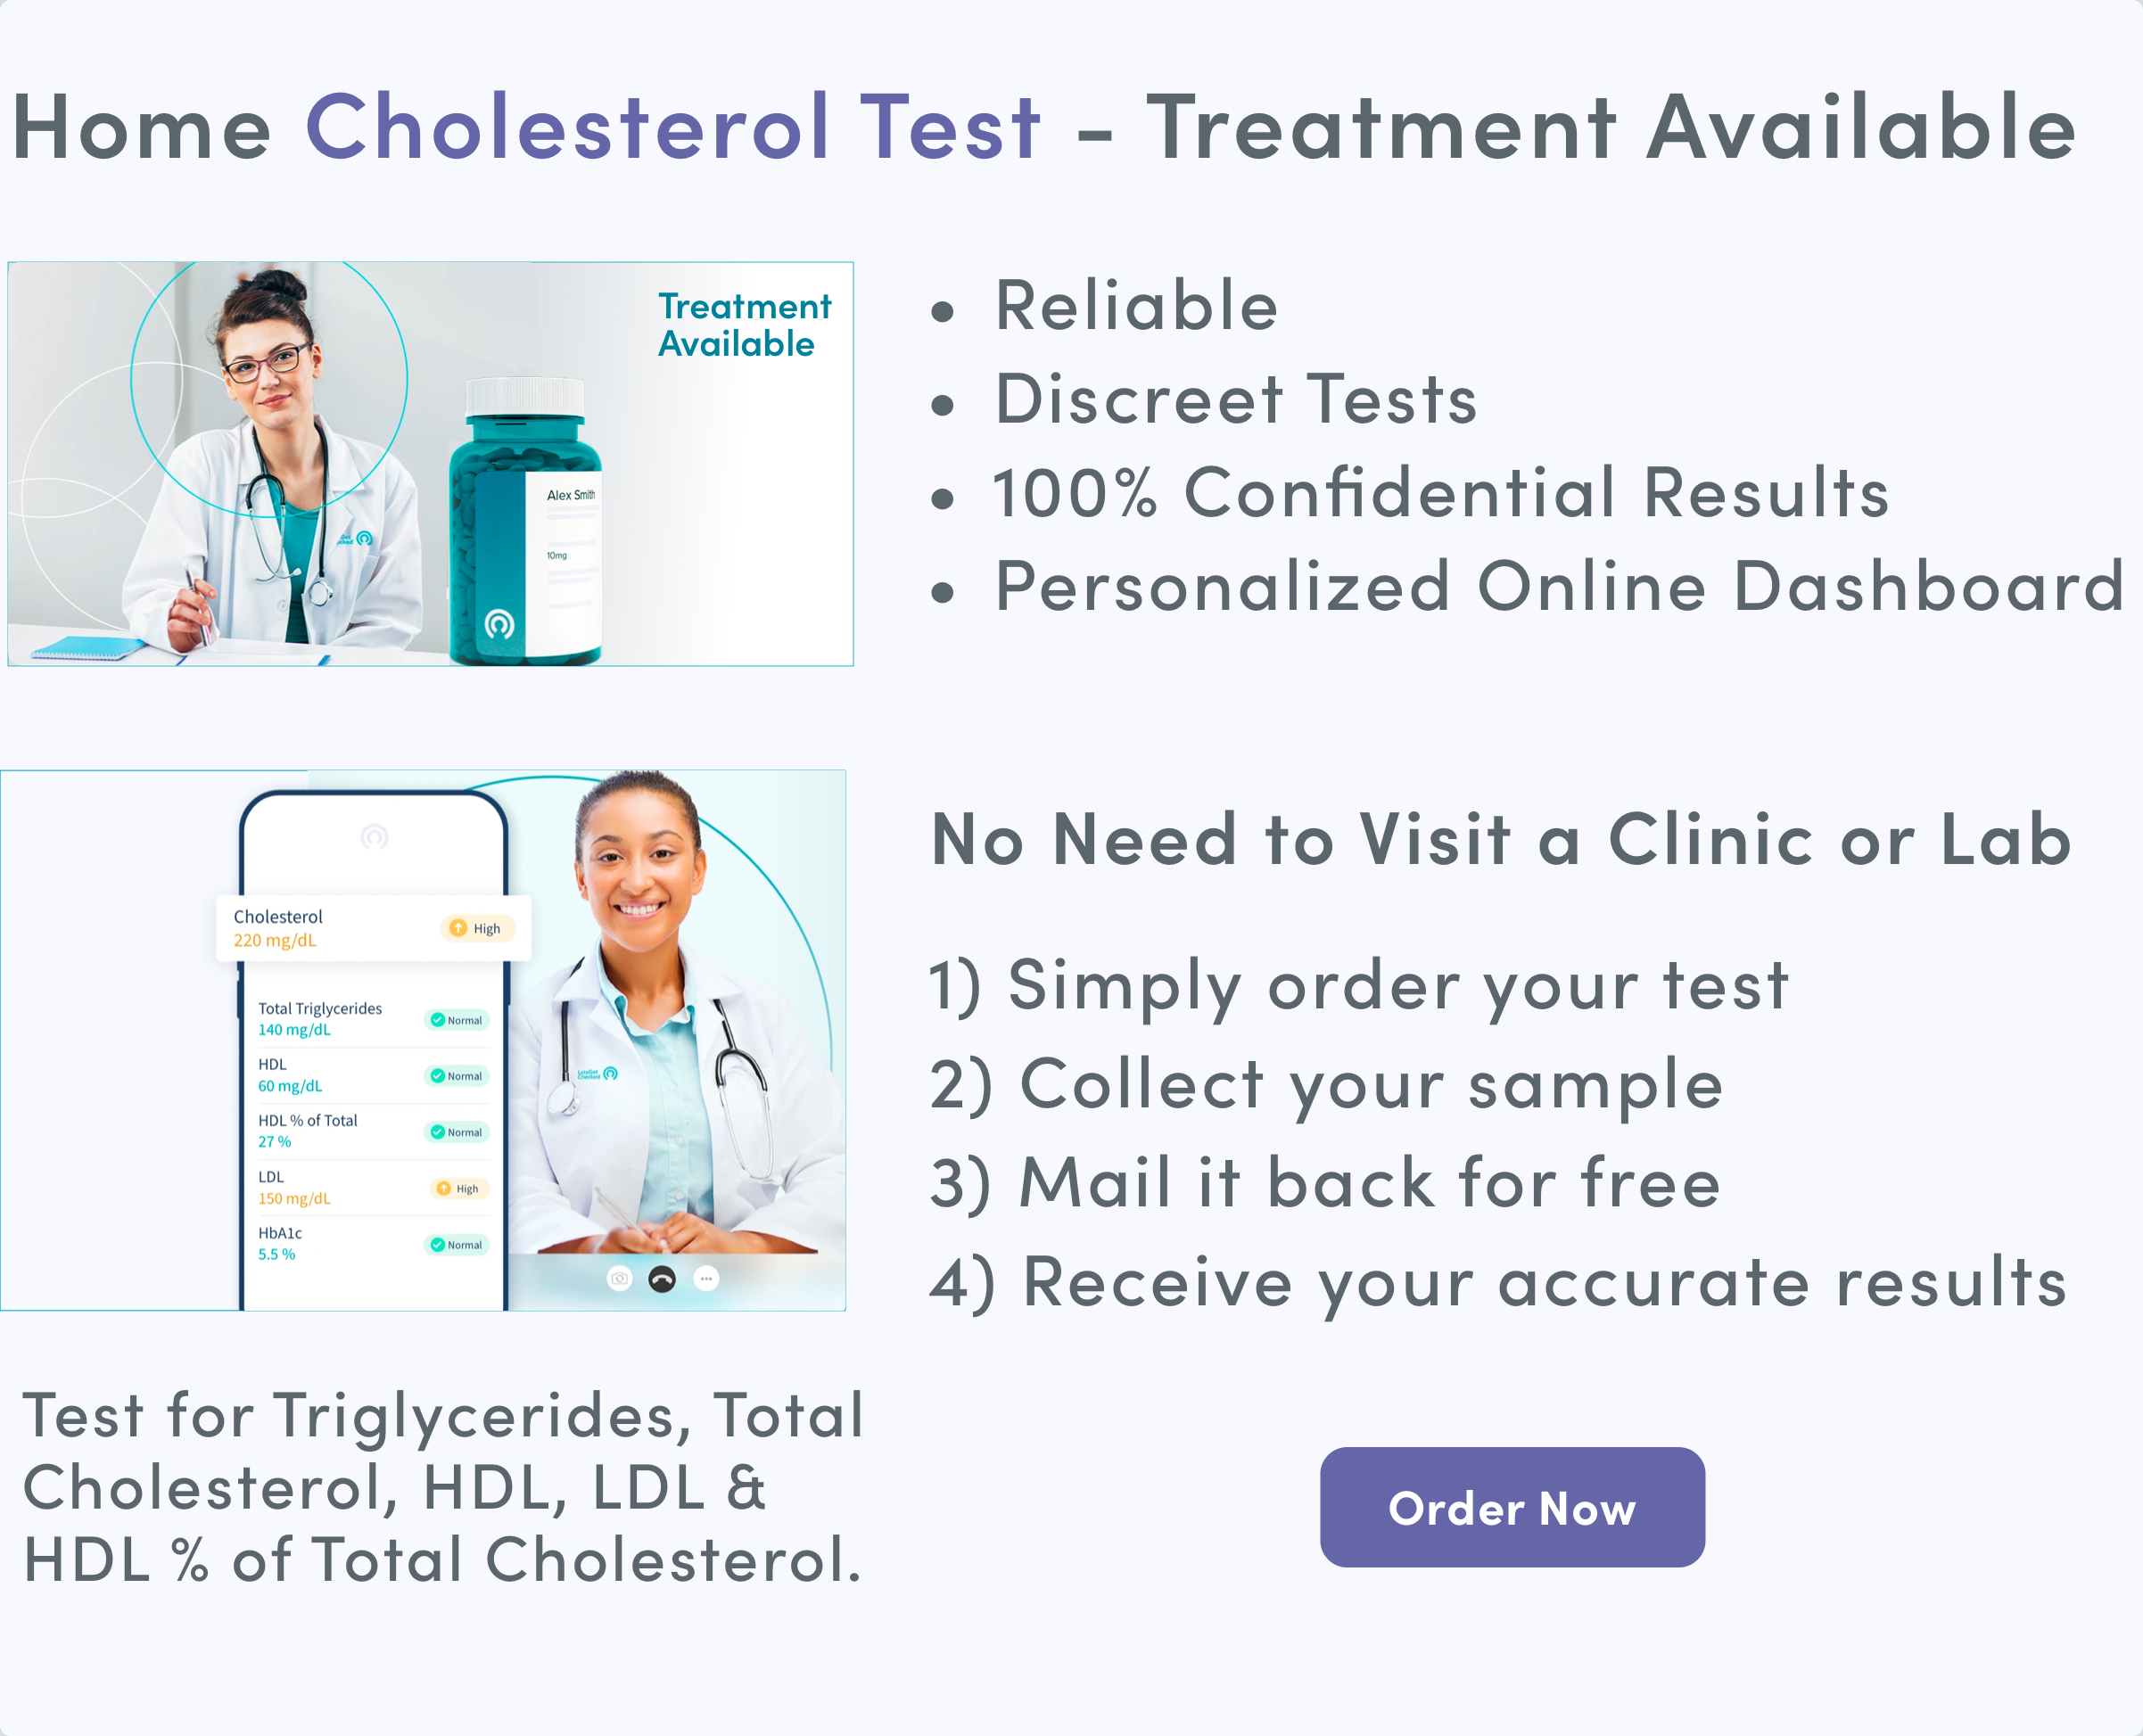 Cholesterol Test with Treatment Available